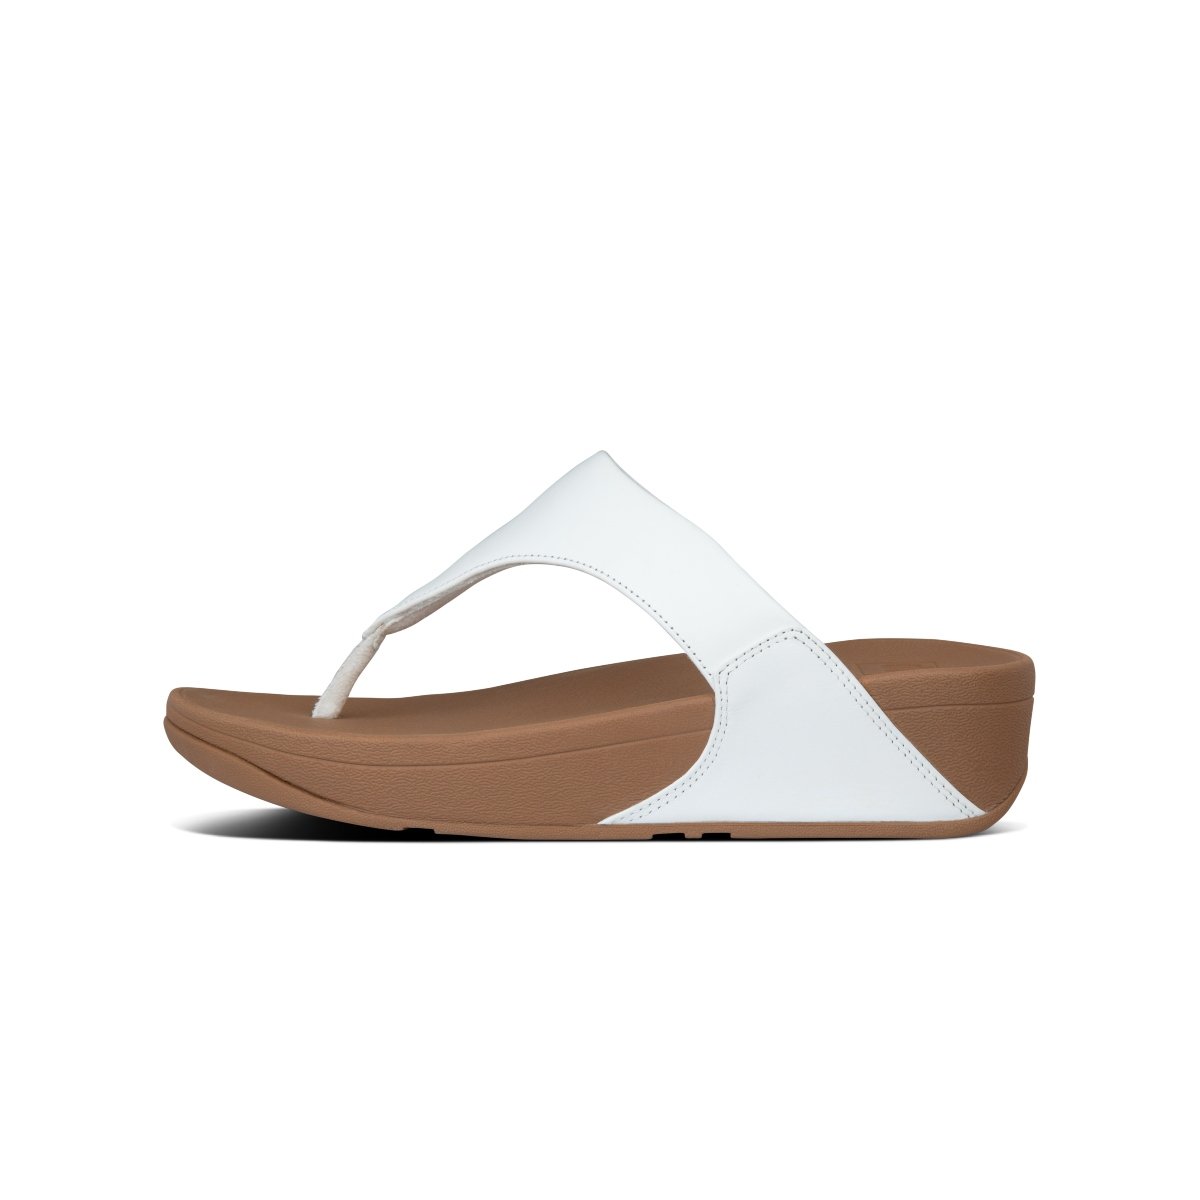 LULU Women Leather Toe-Post Sandals - White (I88-024) | FitFlop Singapore